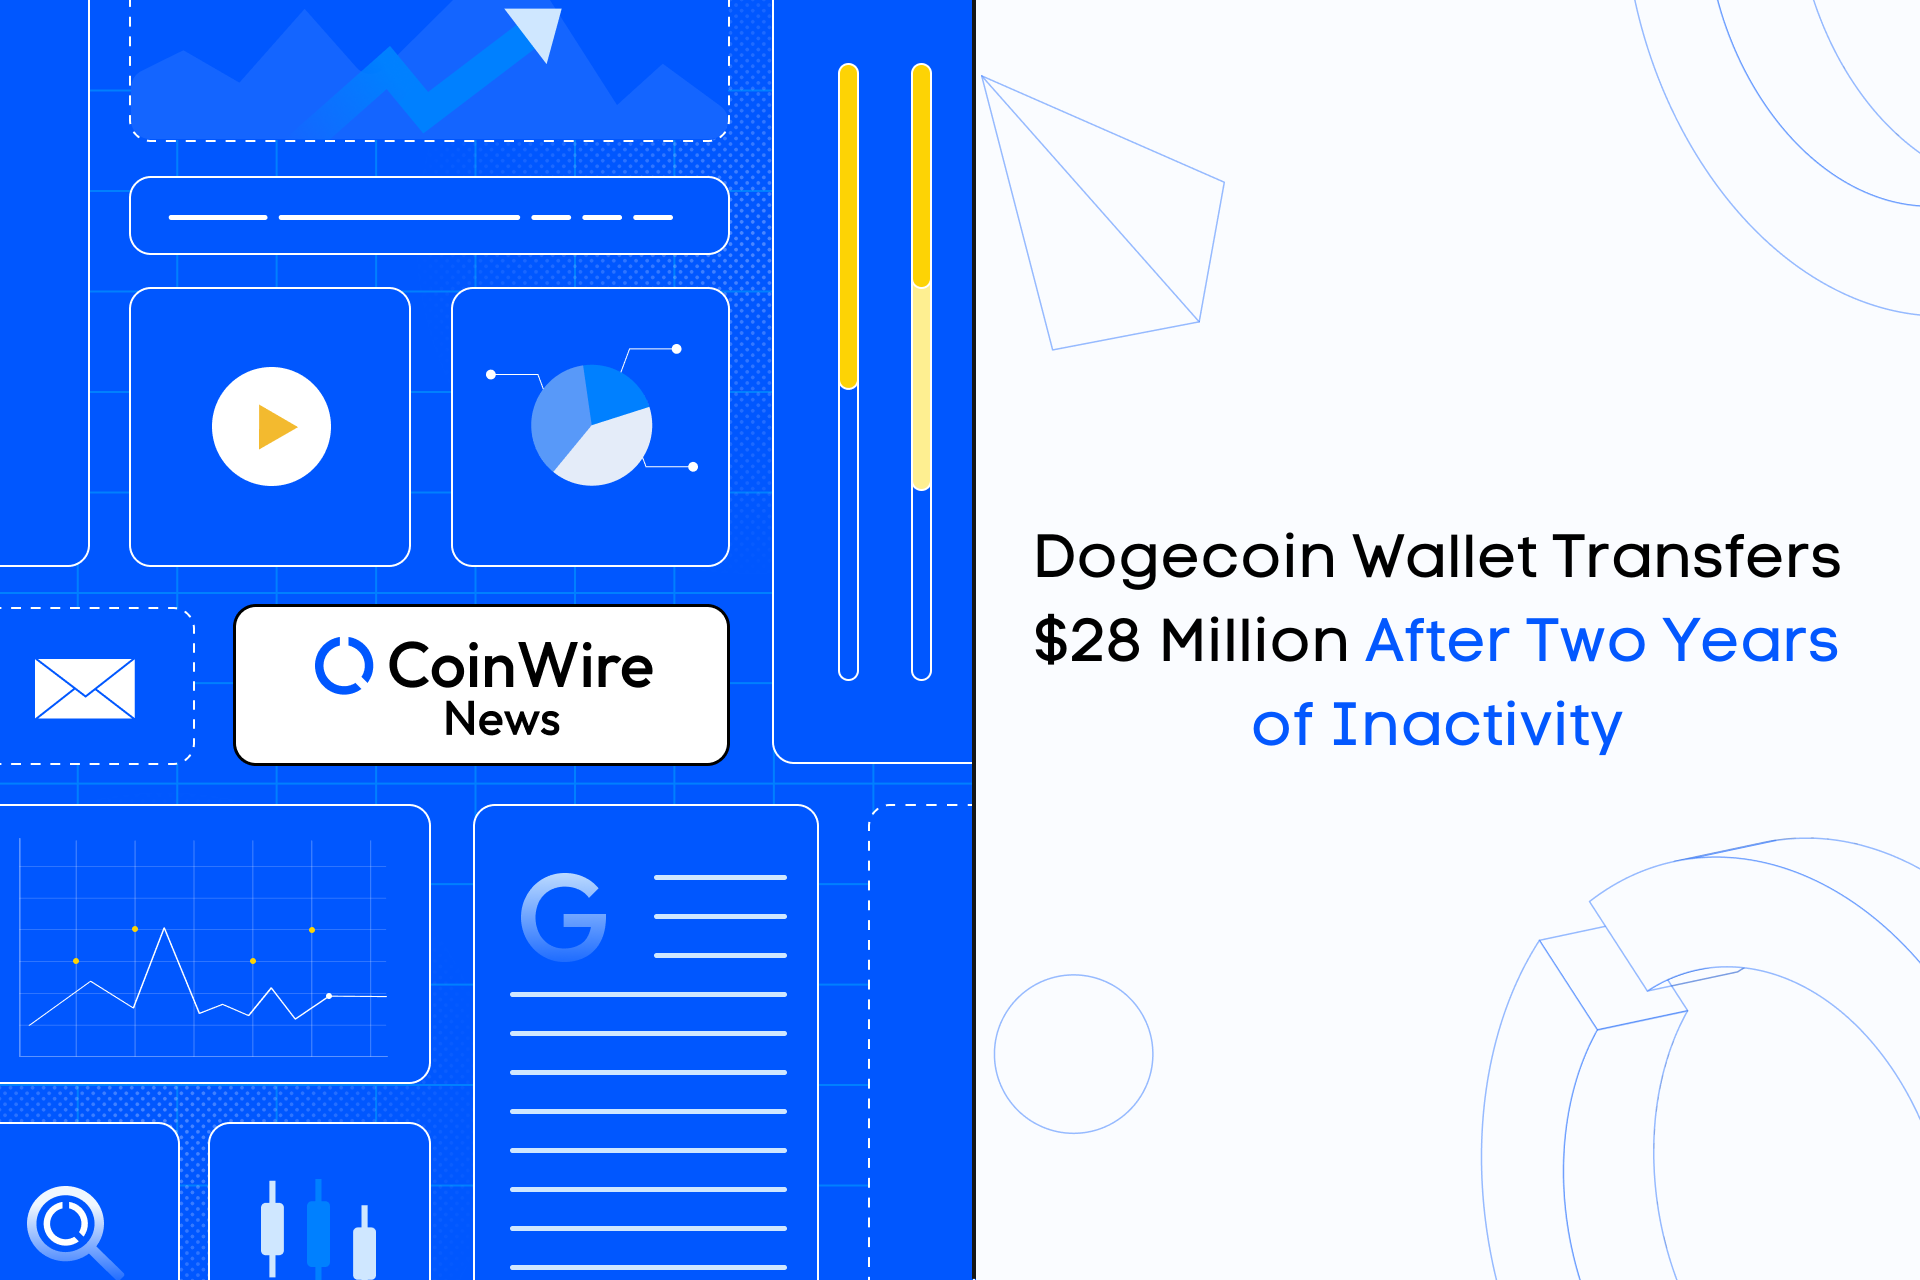 Dogecoin Wallet Transfers $28 Million After Two Years Of Inactivity